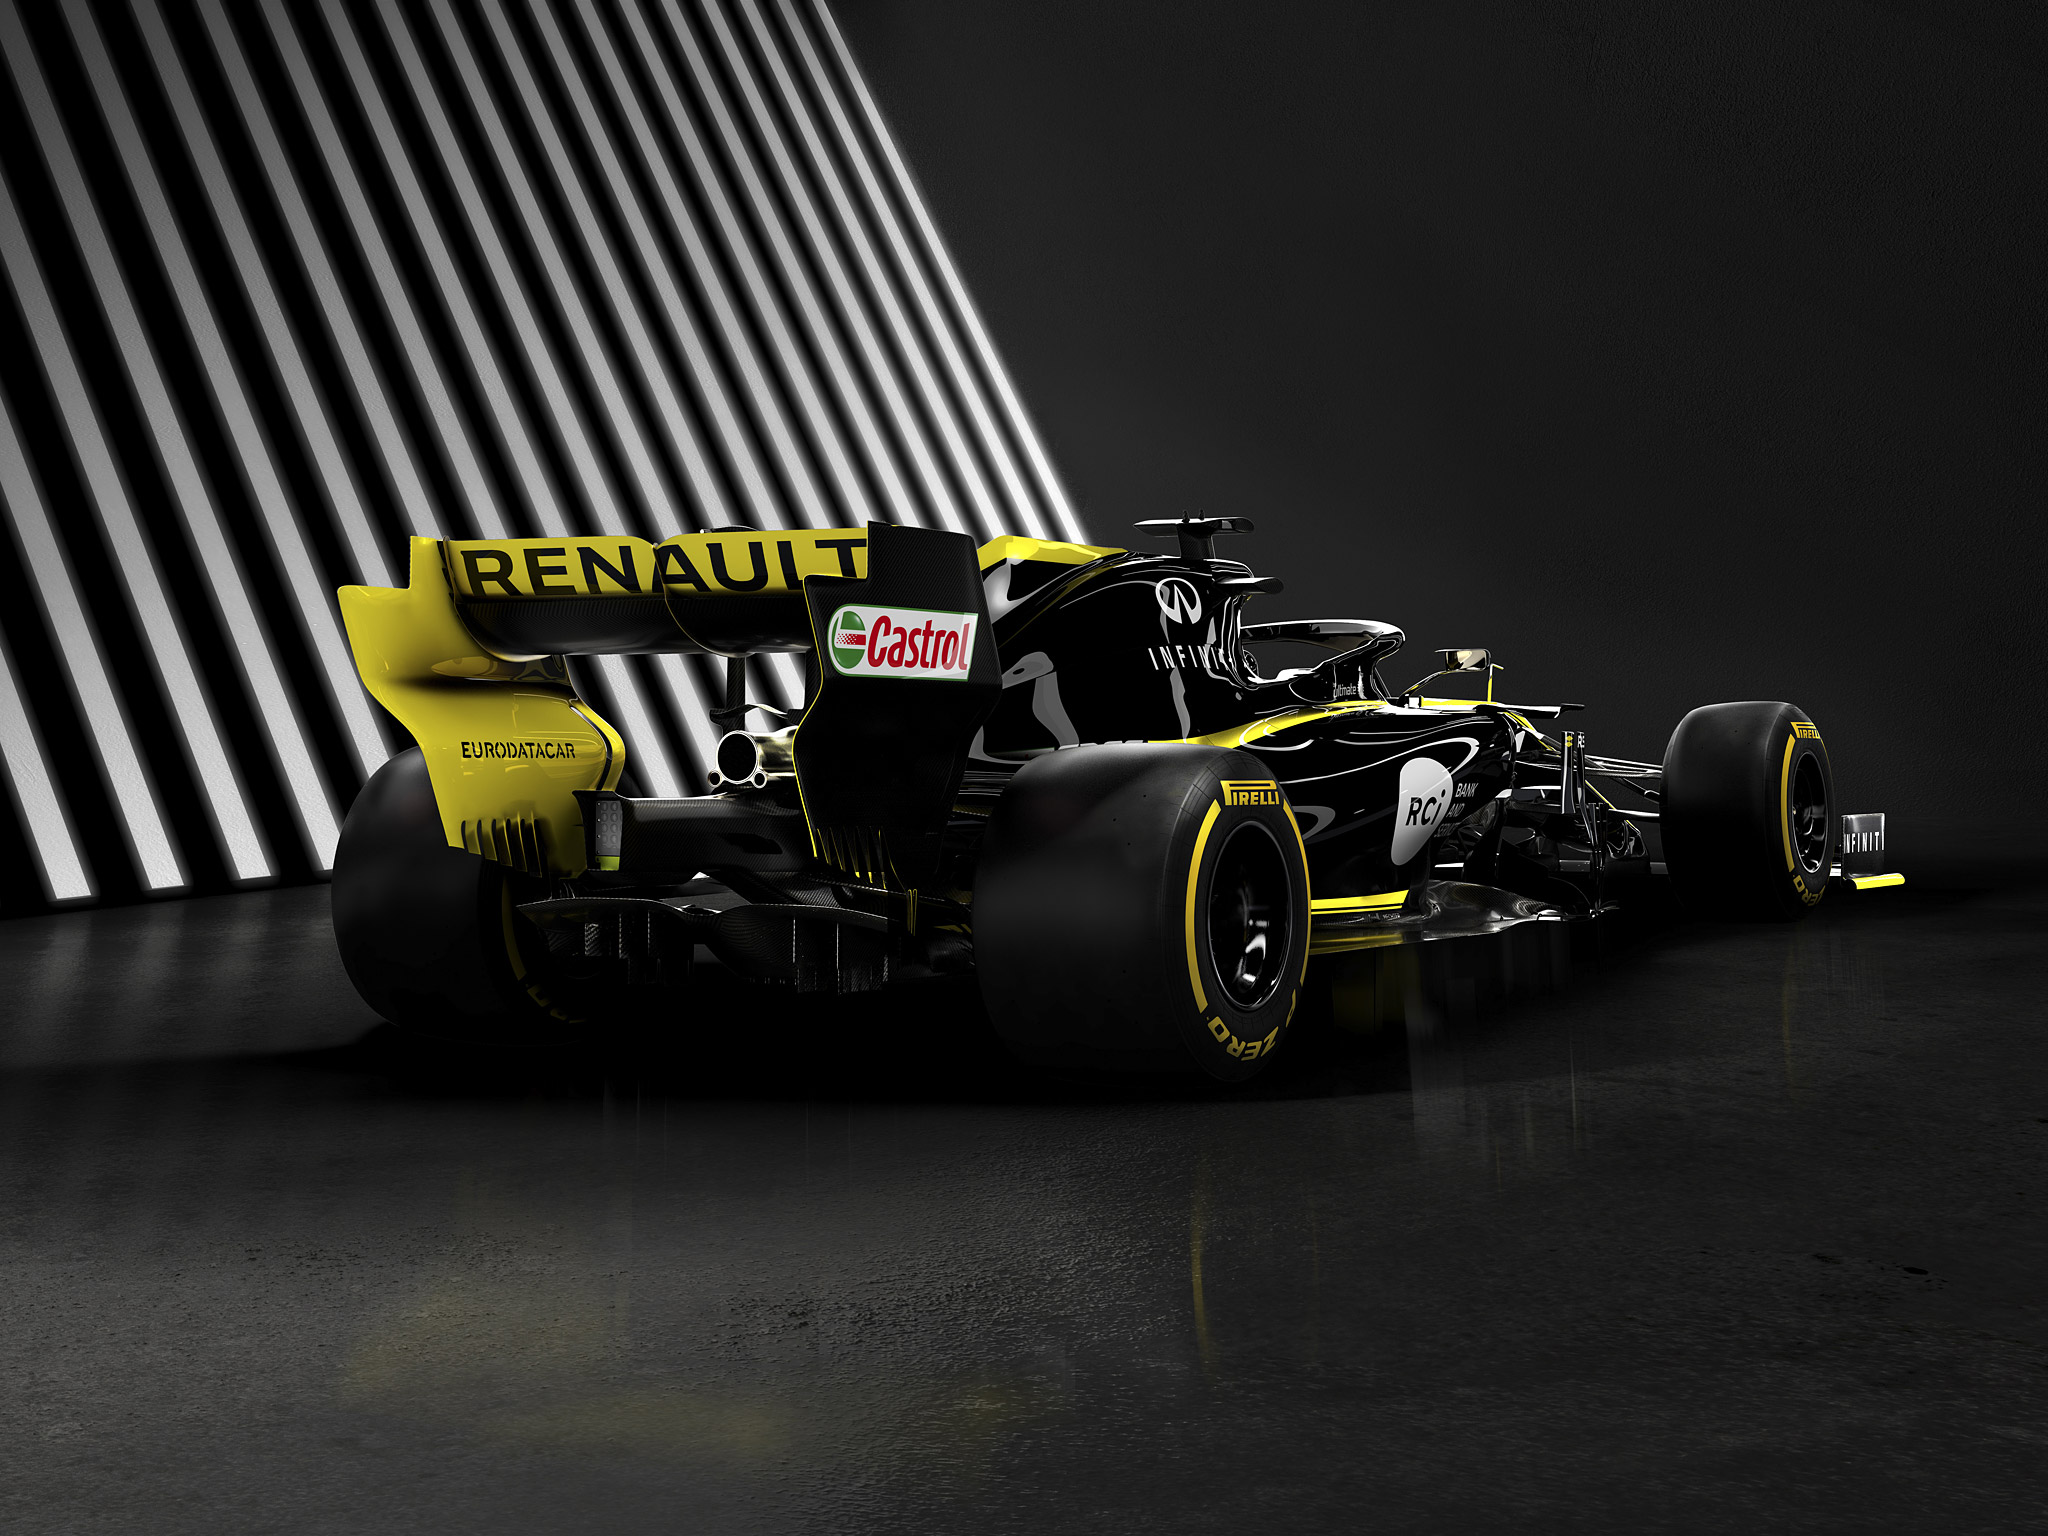 General 2048x1536 renault r.s.19 Formula 1 car yellow Renault yellow cars race cars racing 2019 (year) formula cars livery